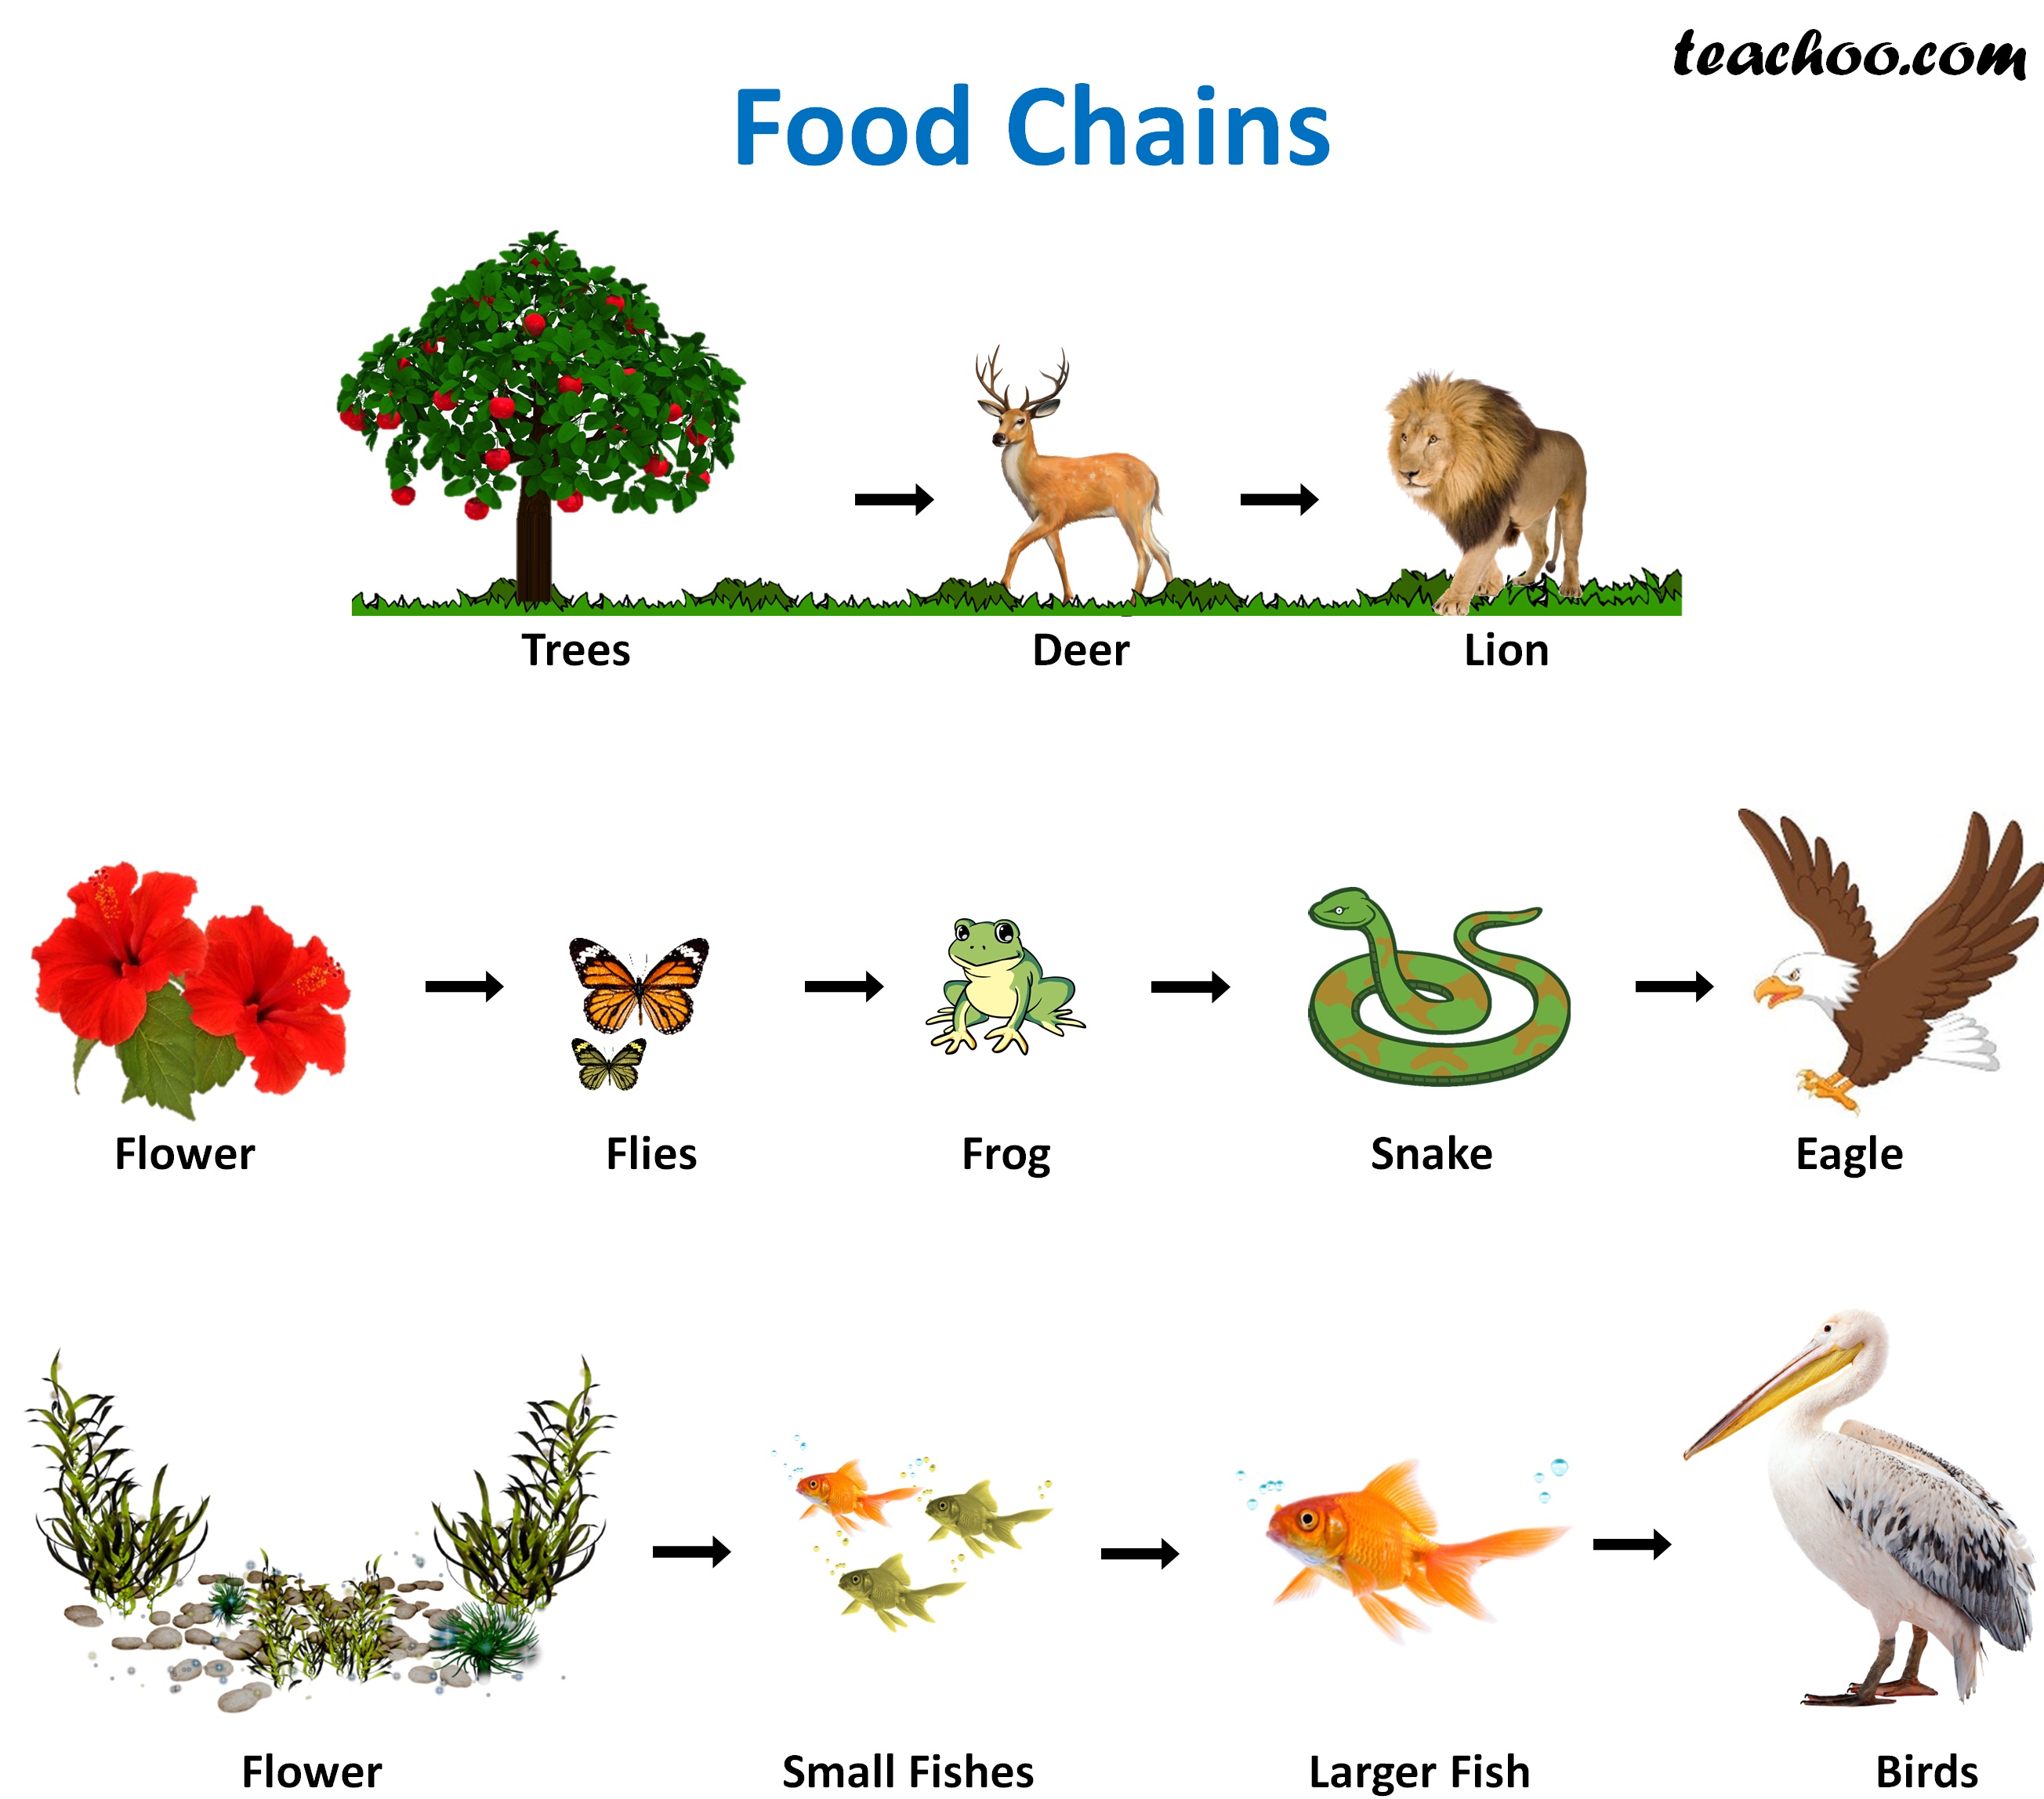 Food Chain and Food Web Meaning, Diagrams, Examples Teachoo